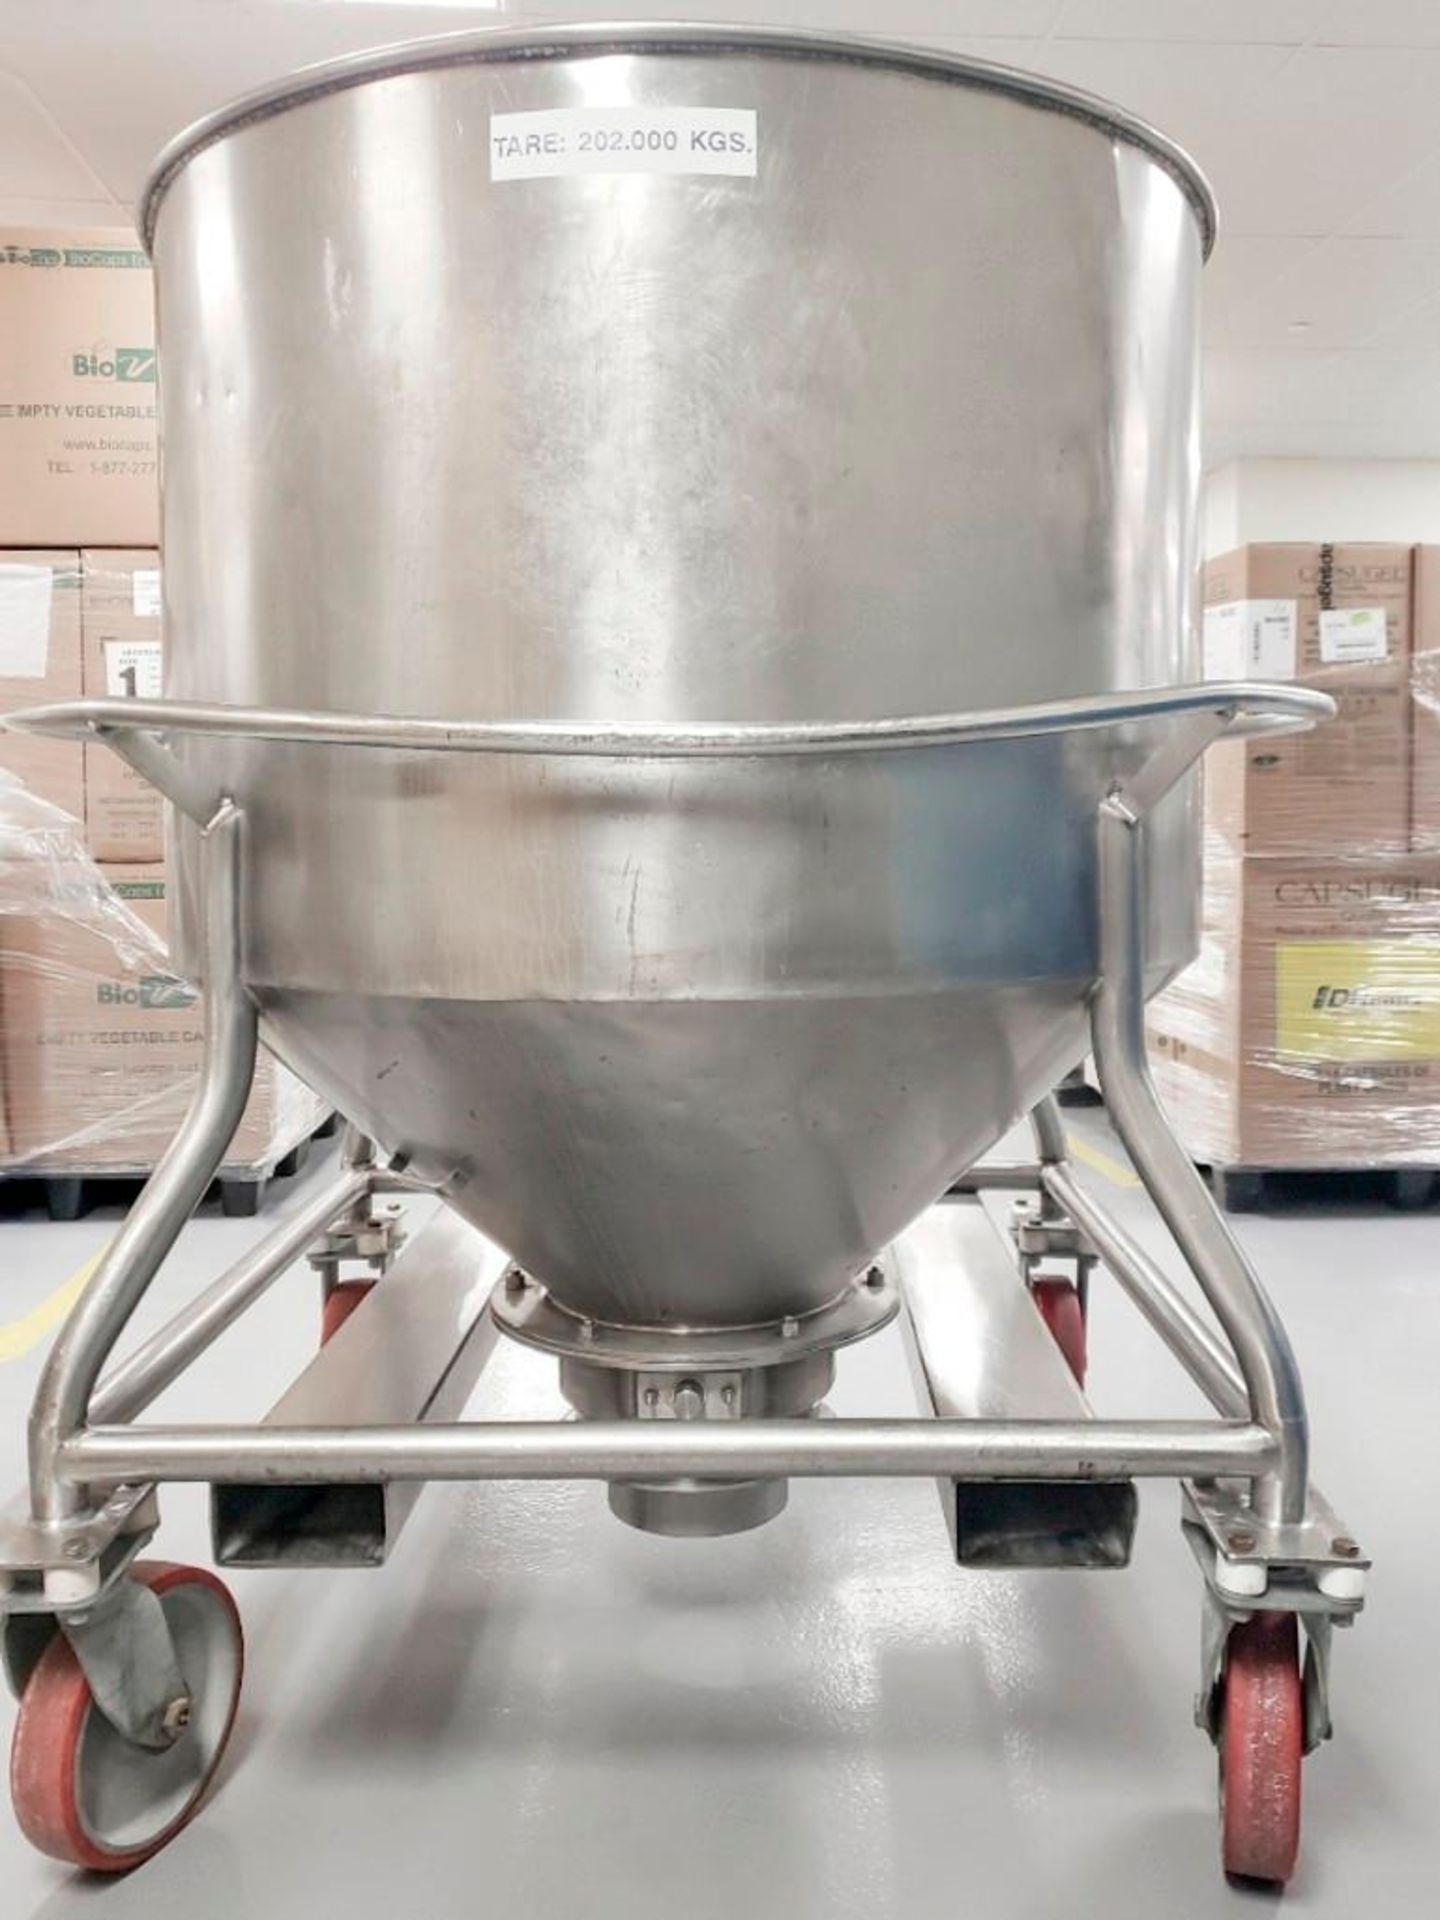 700Kg Capacity Charge Kettle - Image 4 of 12